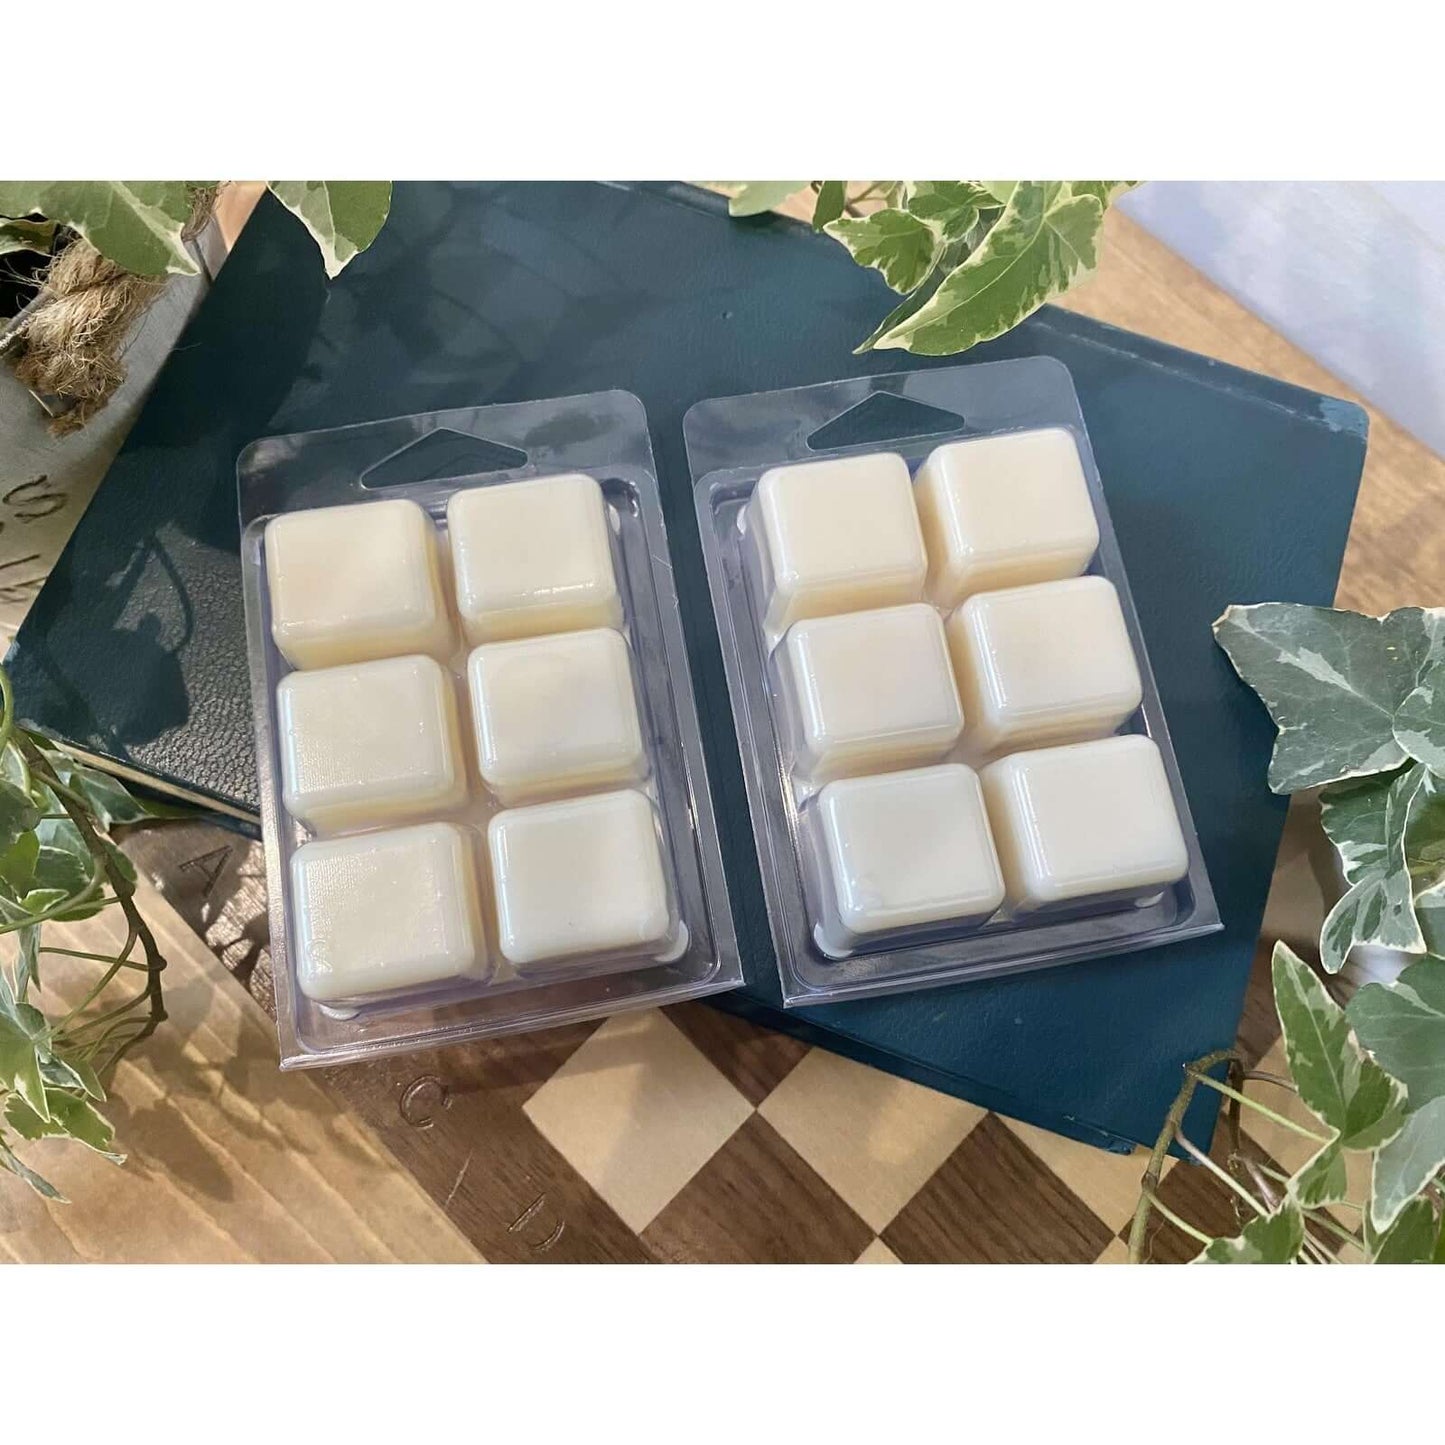 Gain Laundry- IF Type Clamshell Wax Tart Melts- Super Strong